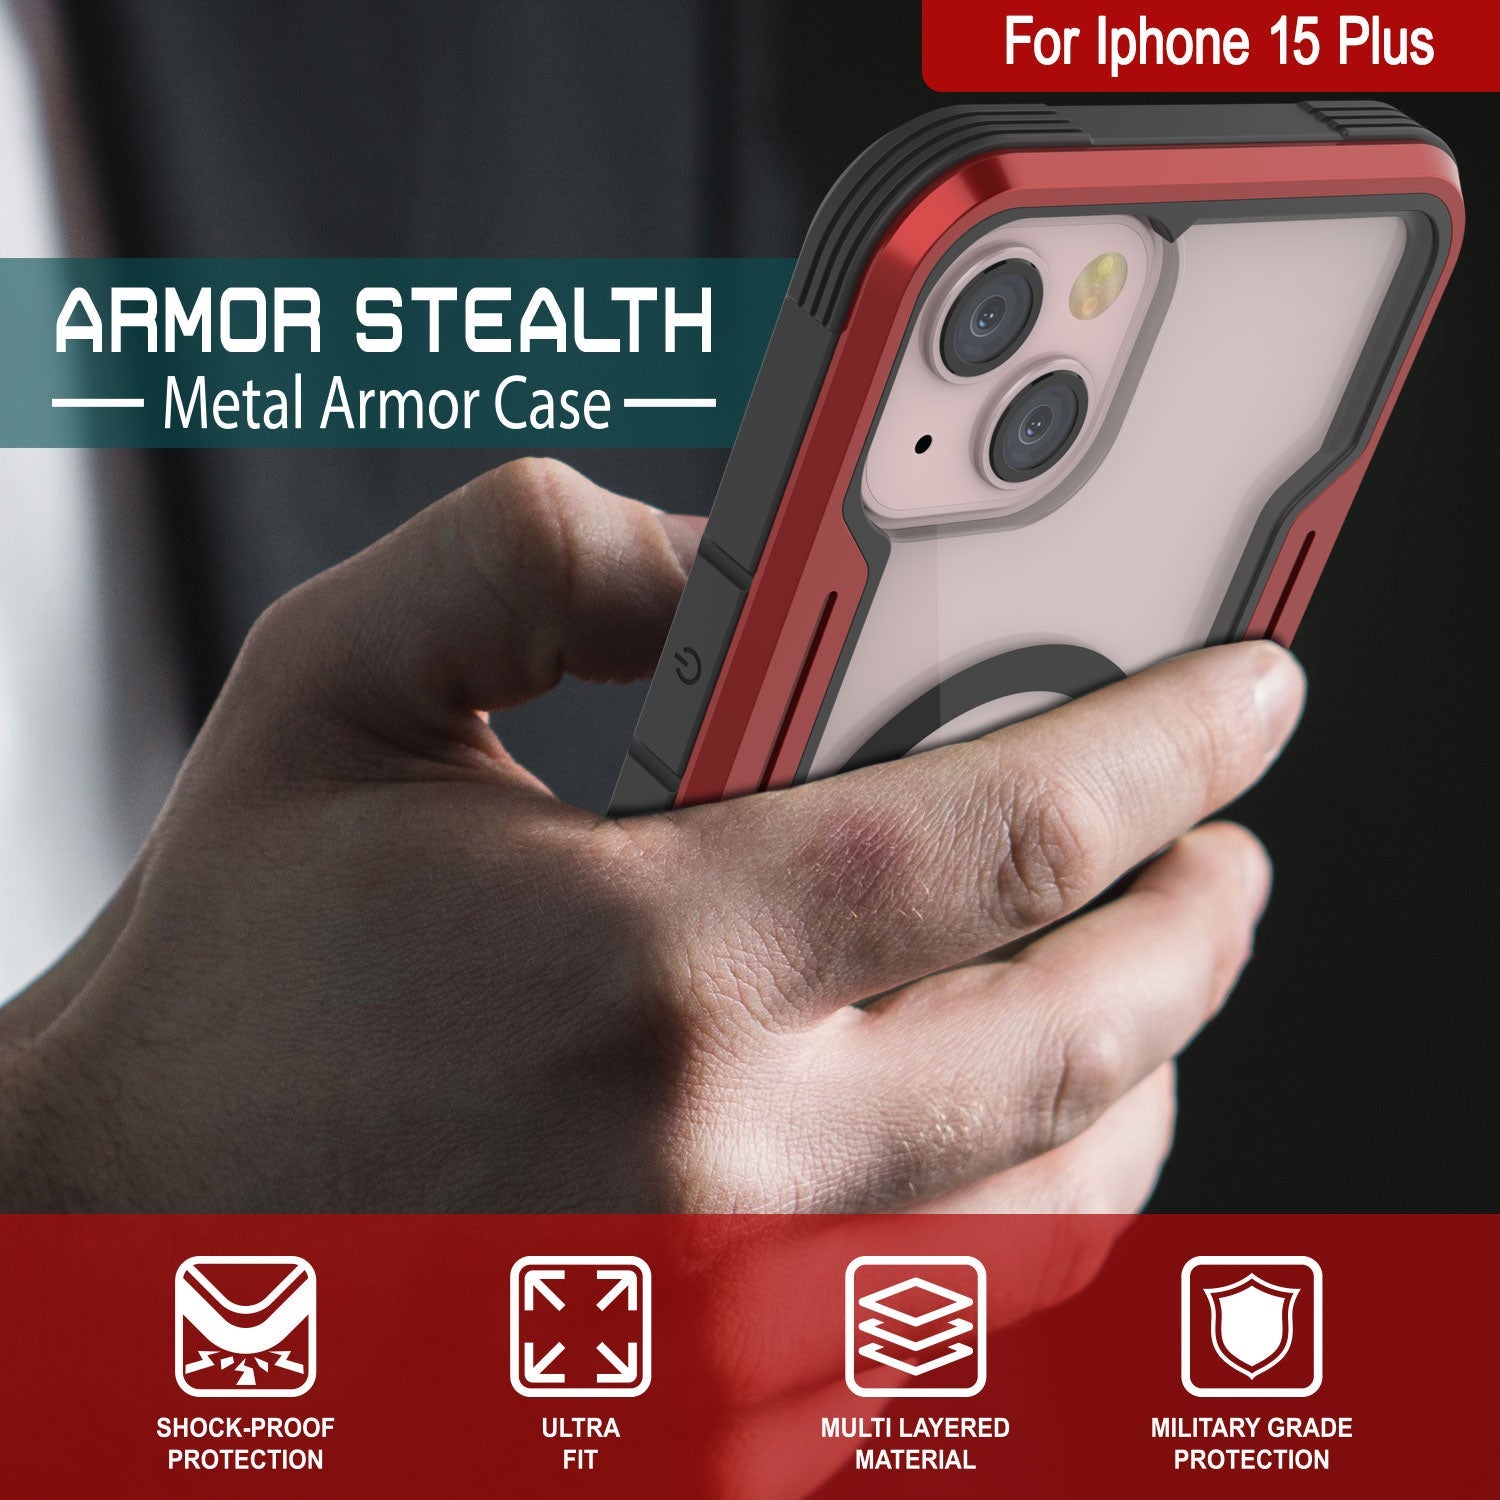 Punkcase iPhone 15 Plus Armor Stealth MAG Defense Case Protective Military Grade Multilayer Cover [Red]